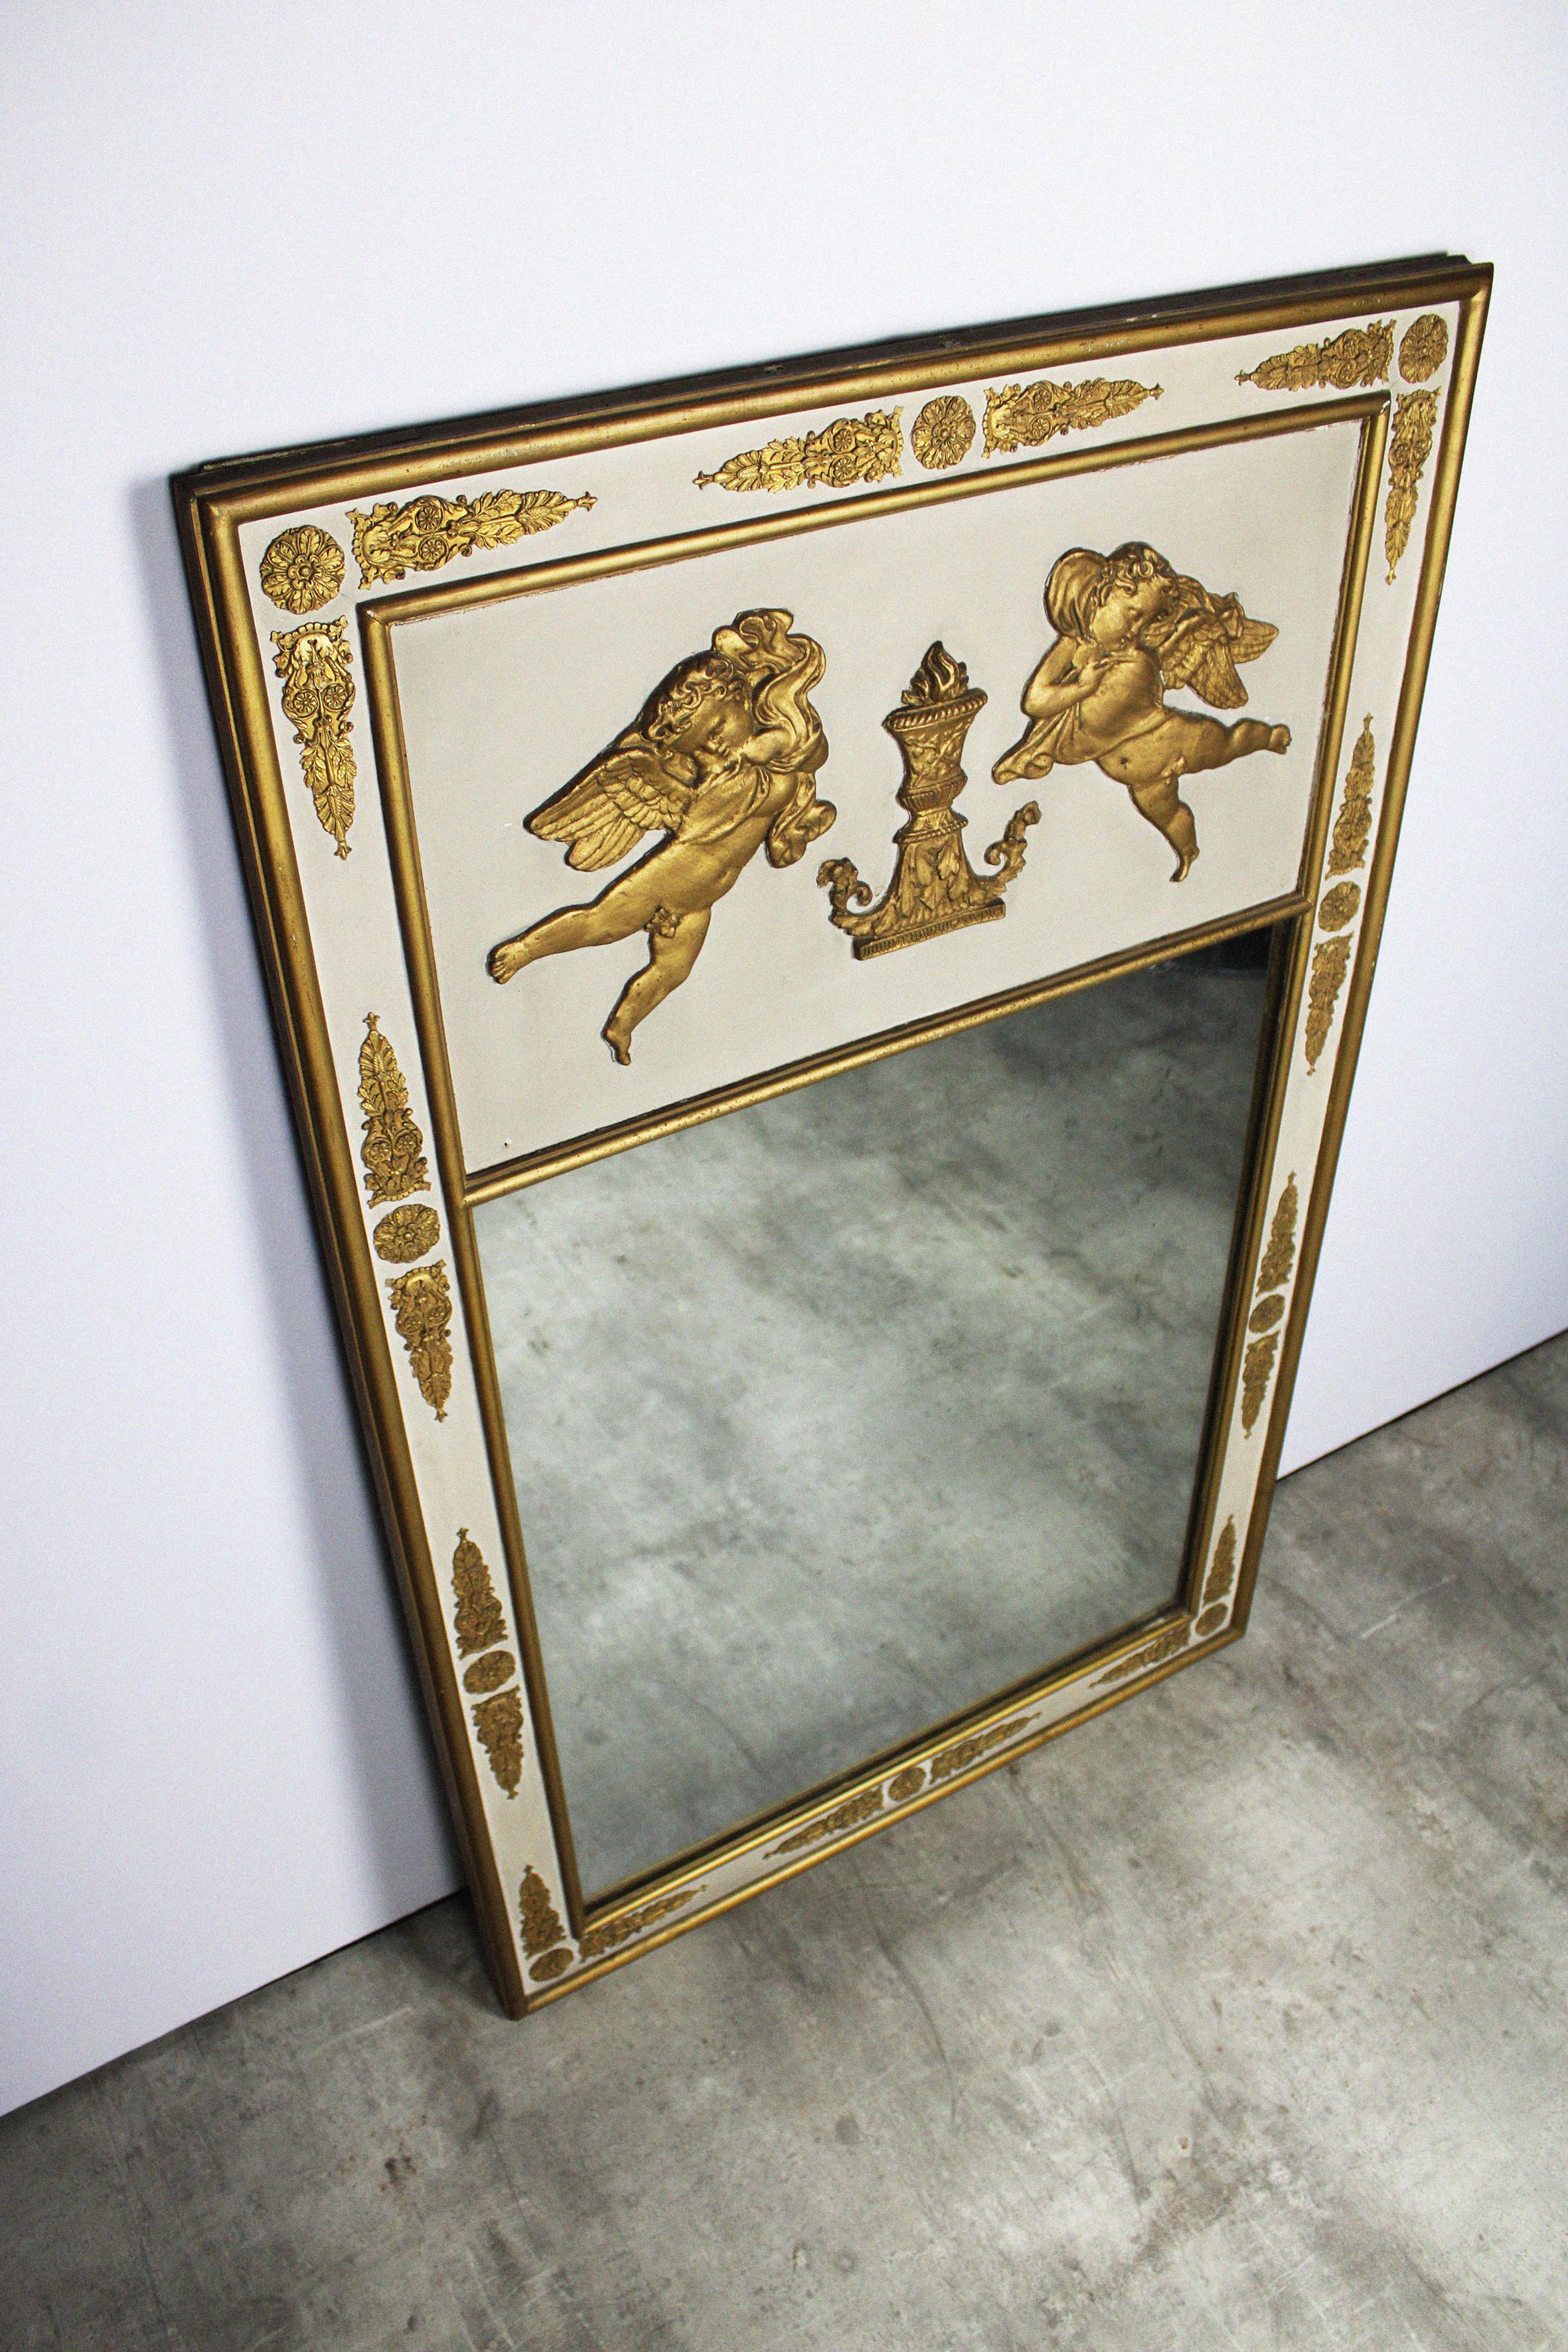 Neoclassical Mantel Mirror Gold Leaf White Gilt Wood Renaissance Rococo 19th Century France For Sale